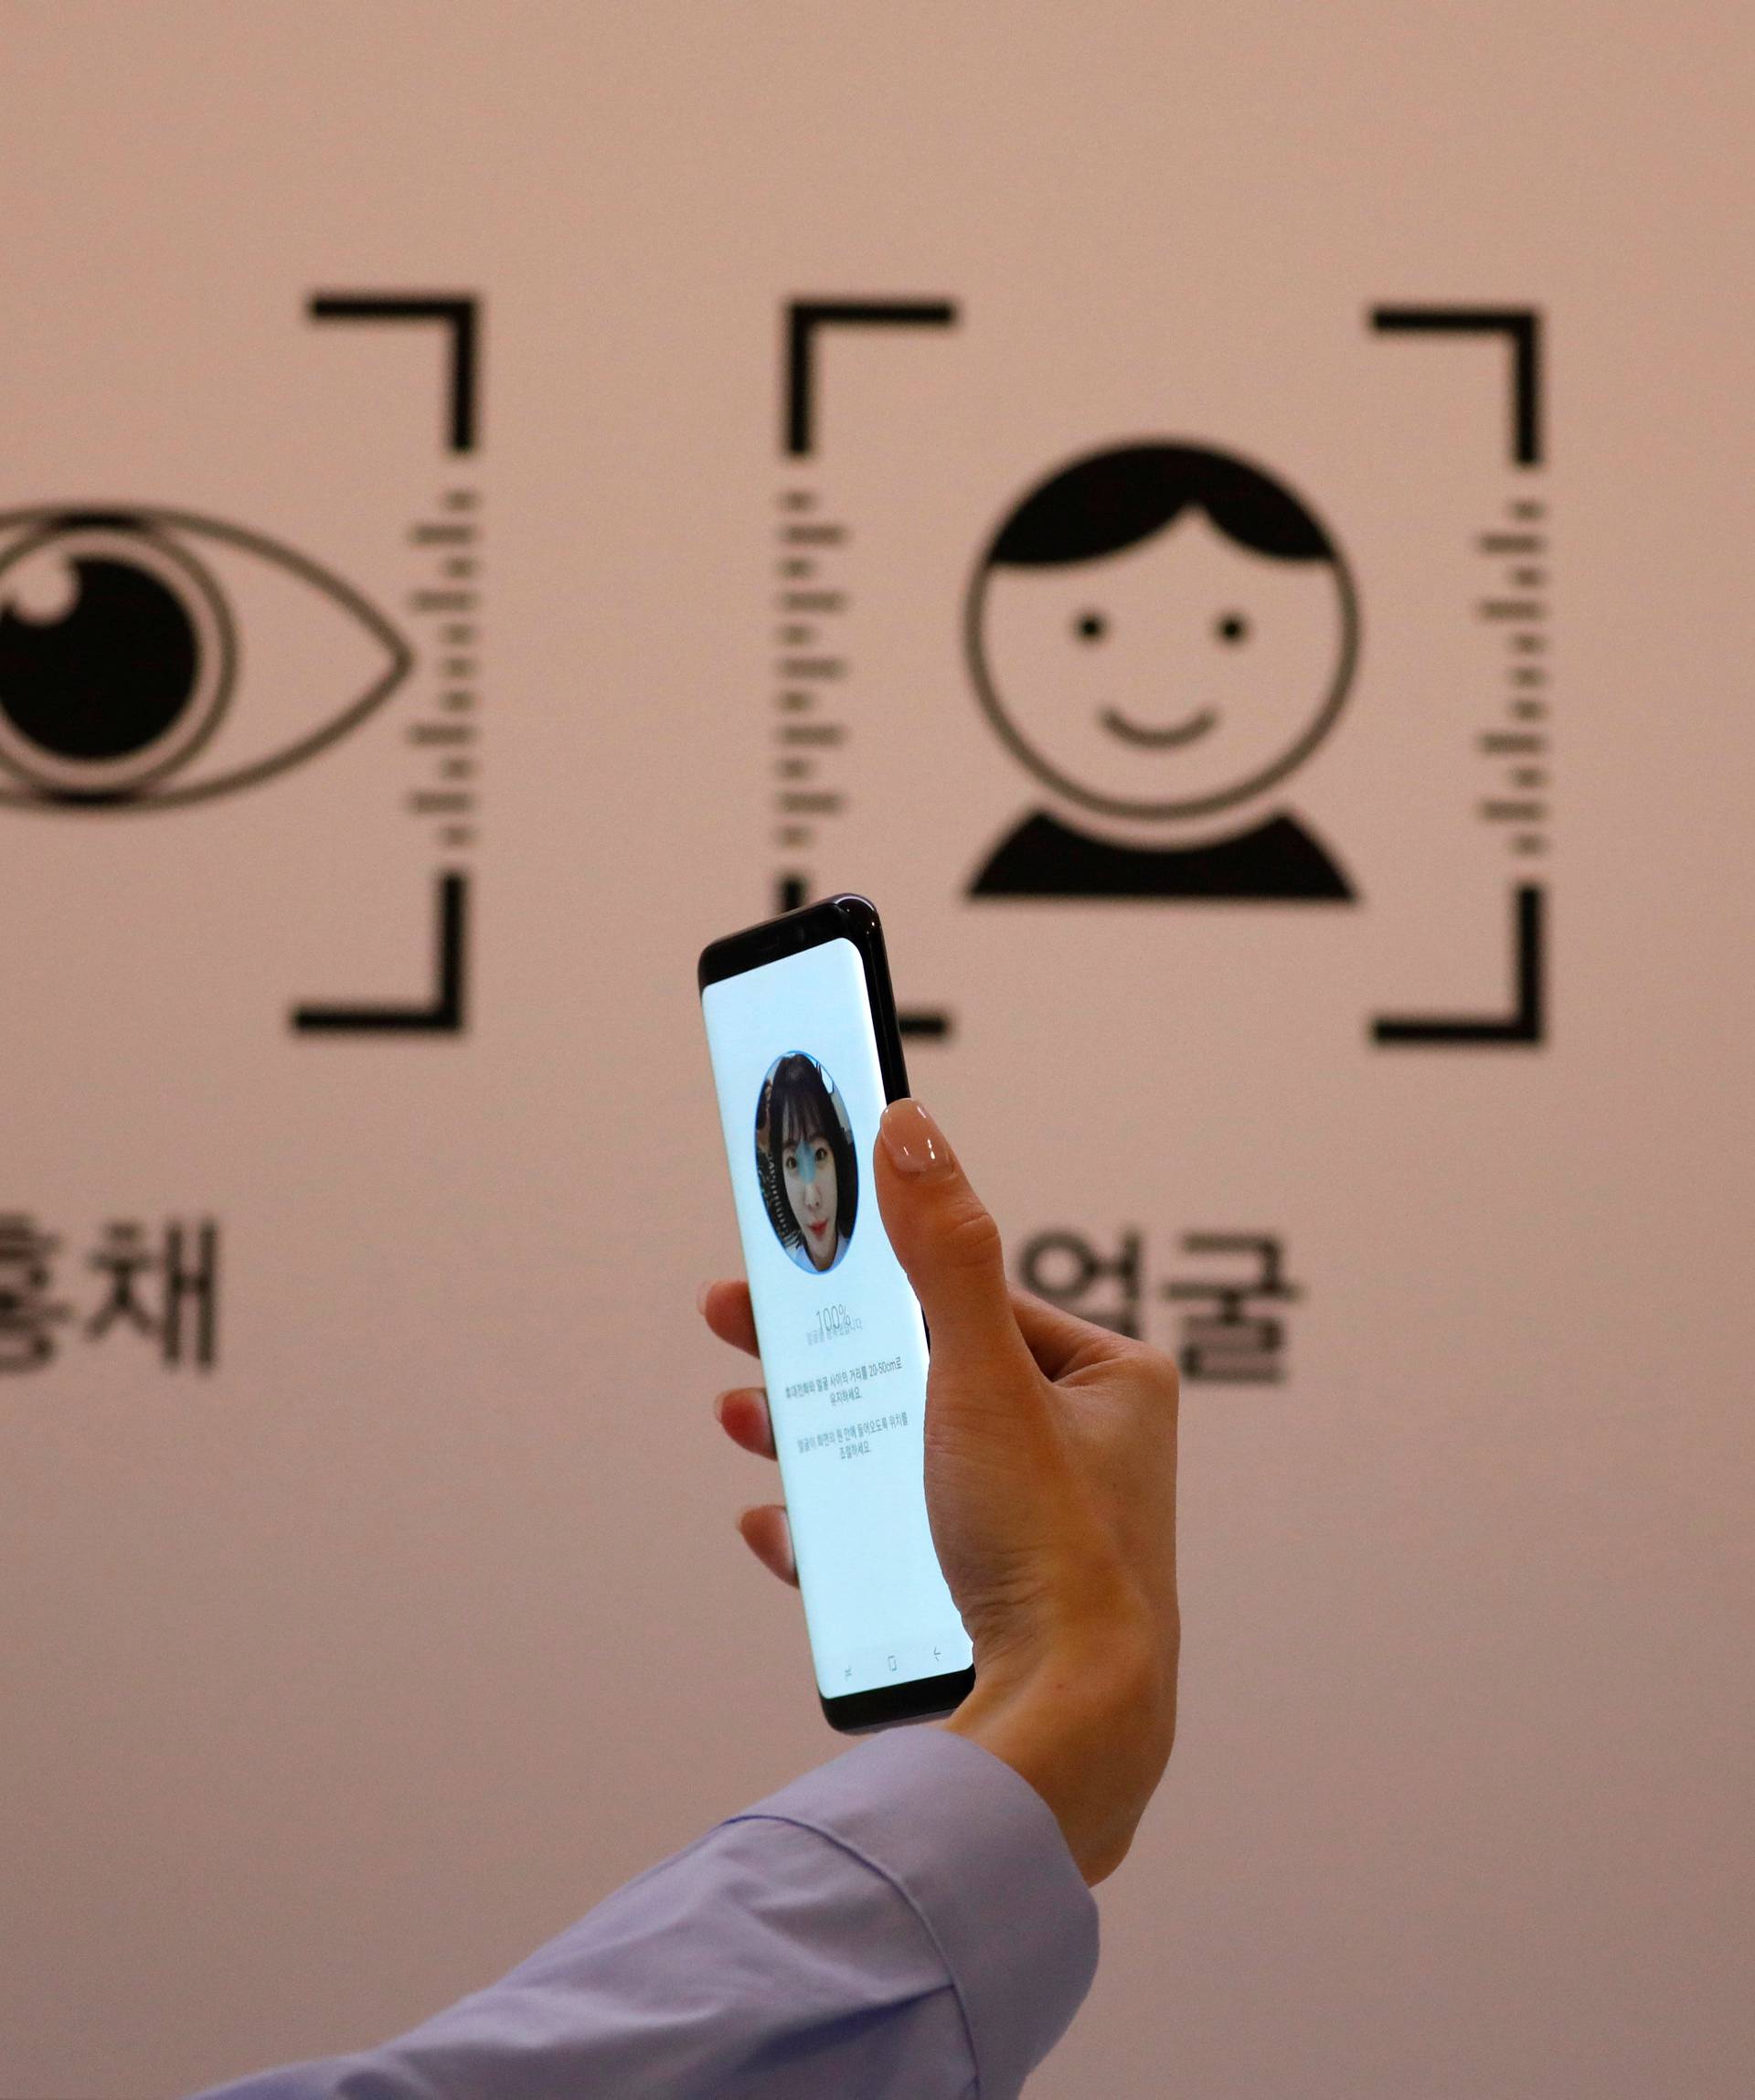 An employee demonstrates a Samsung Electronics' Galaxy S8 smartphone during a media event at a company's building in Seoul